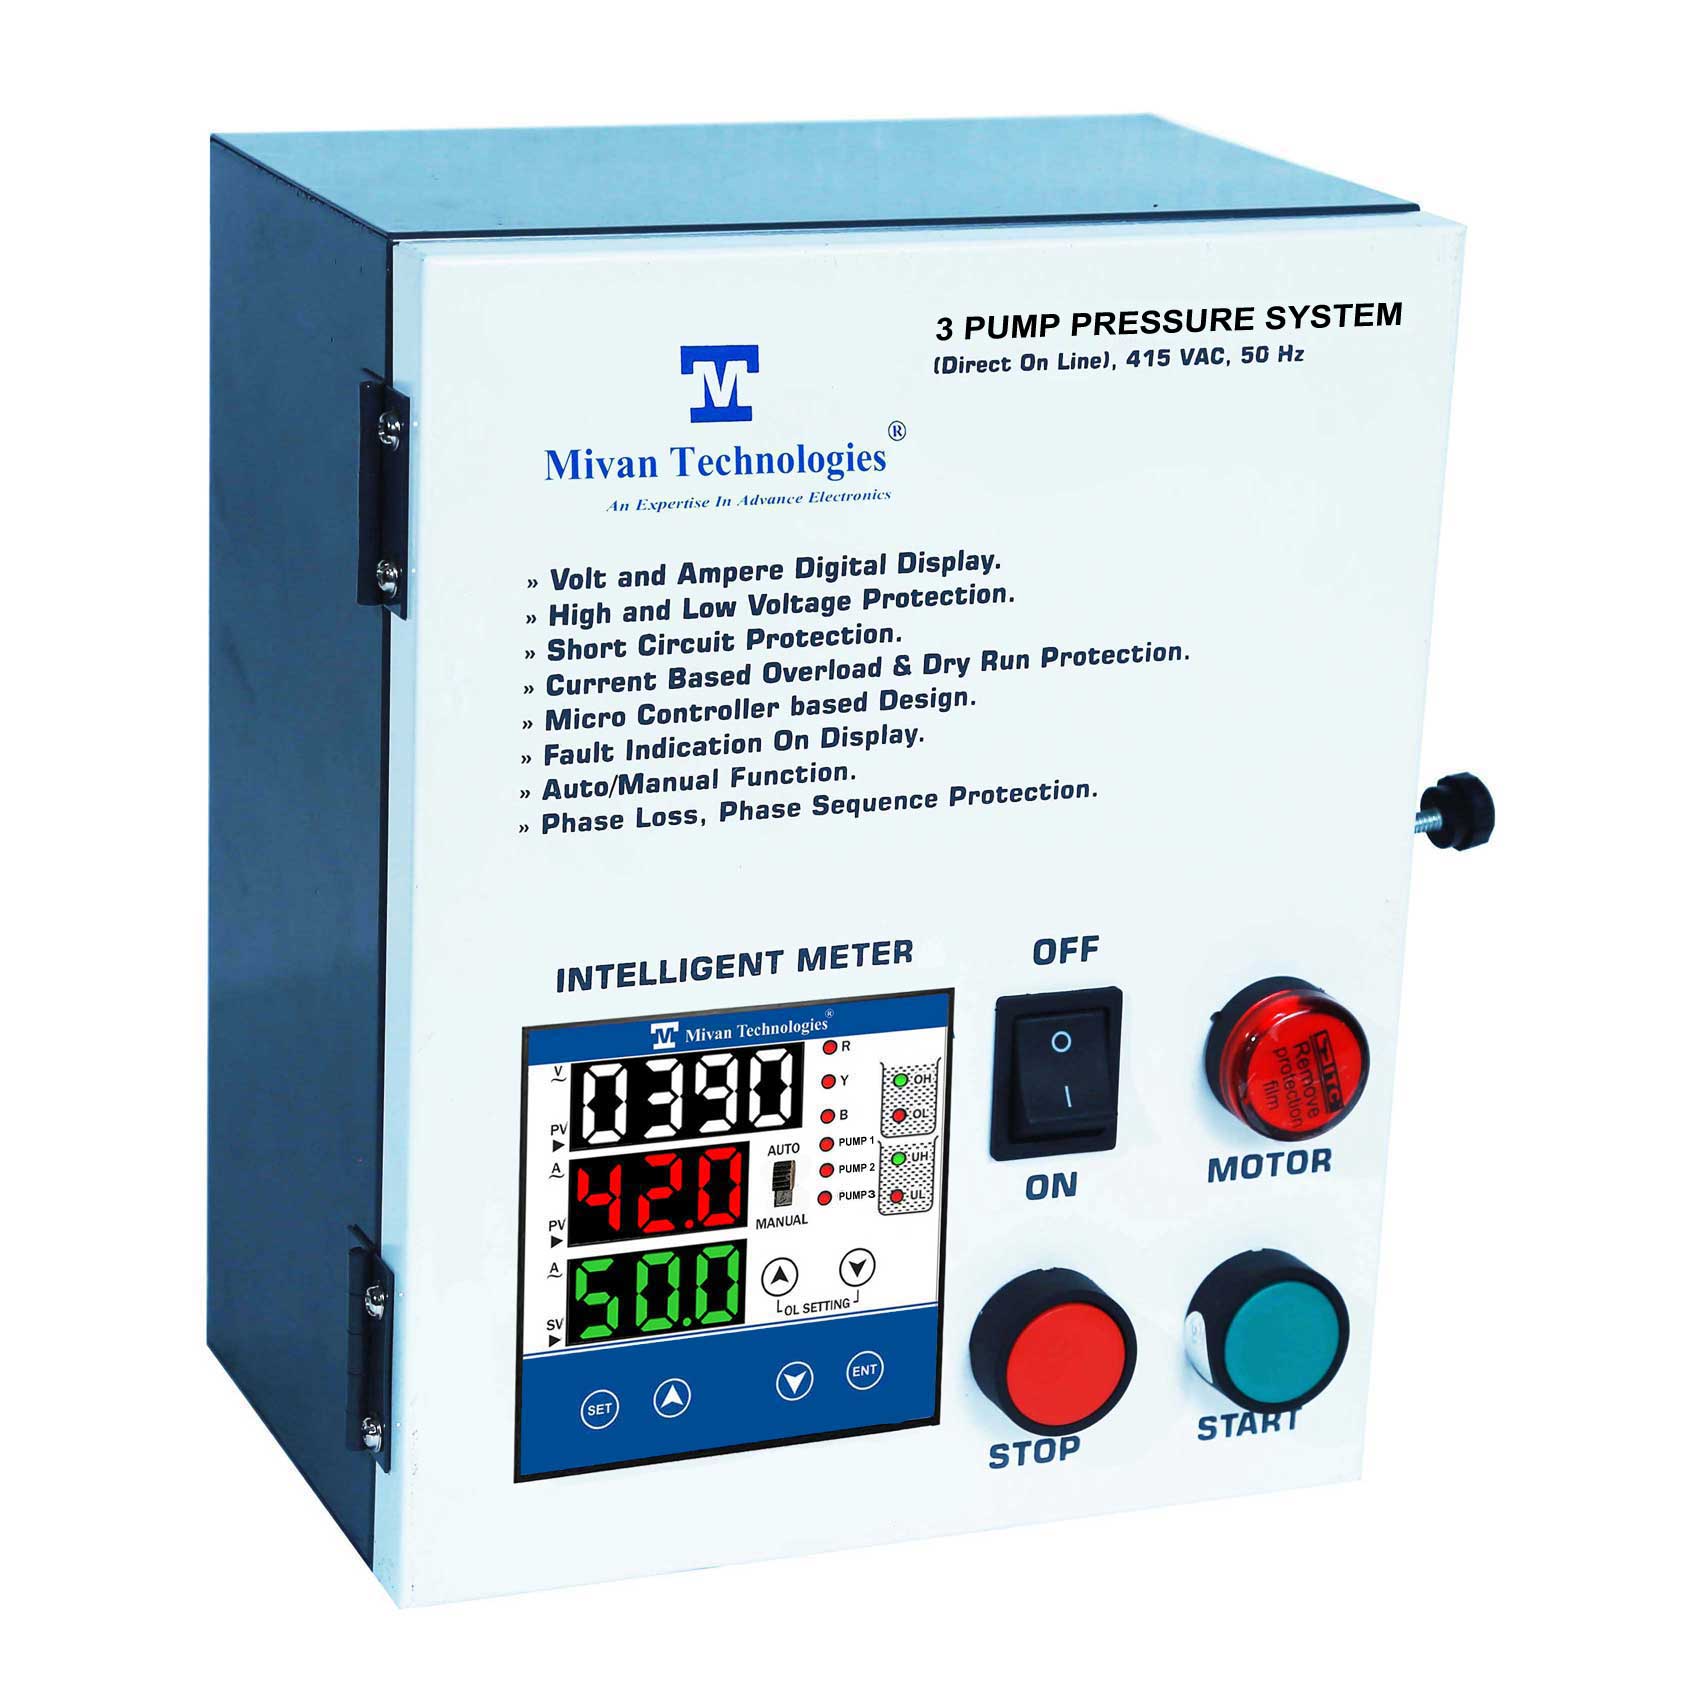 DOL TP 3 phase Three pump pressure system with HV LV OL Dry protection with Auto switch spp and timer suitable up to 10 hp motor